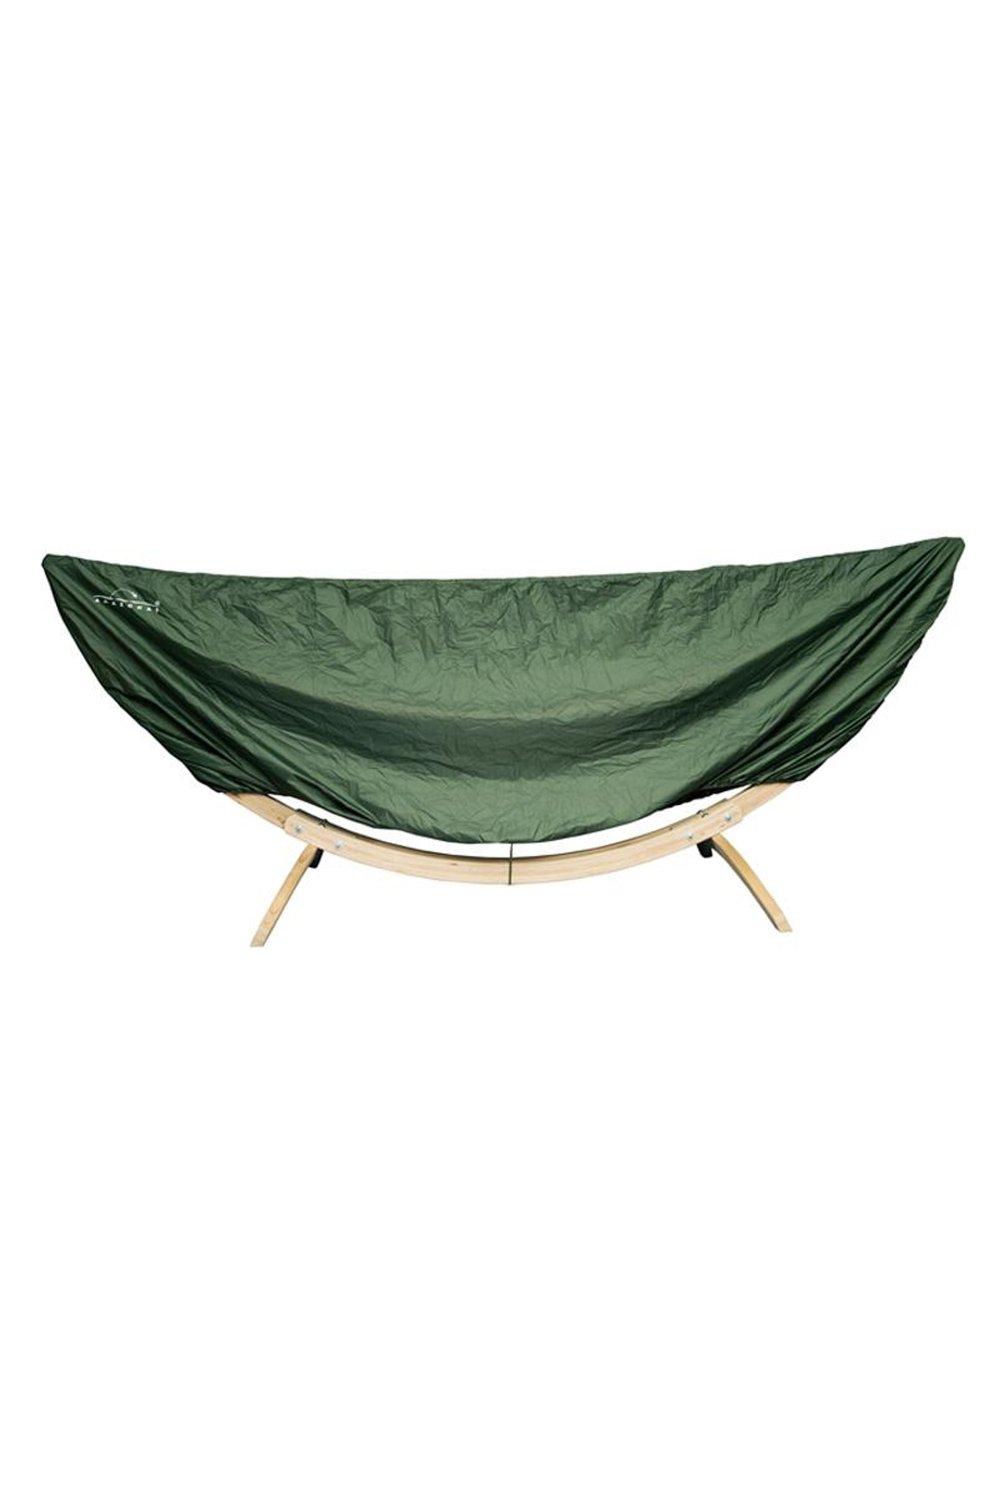 Hammock and Stand Cover